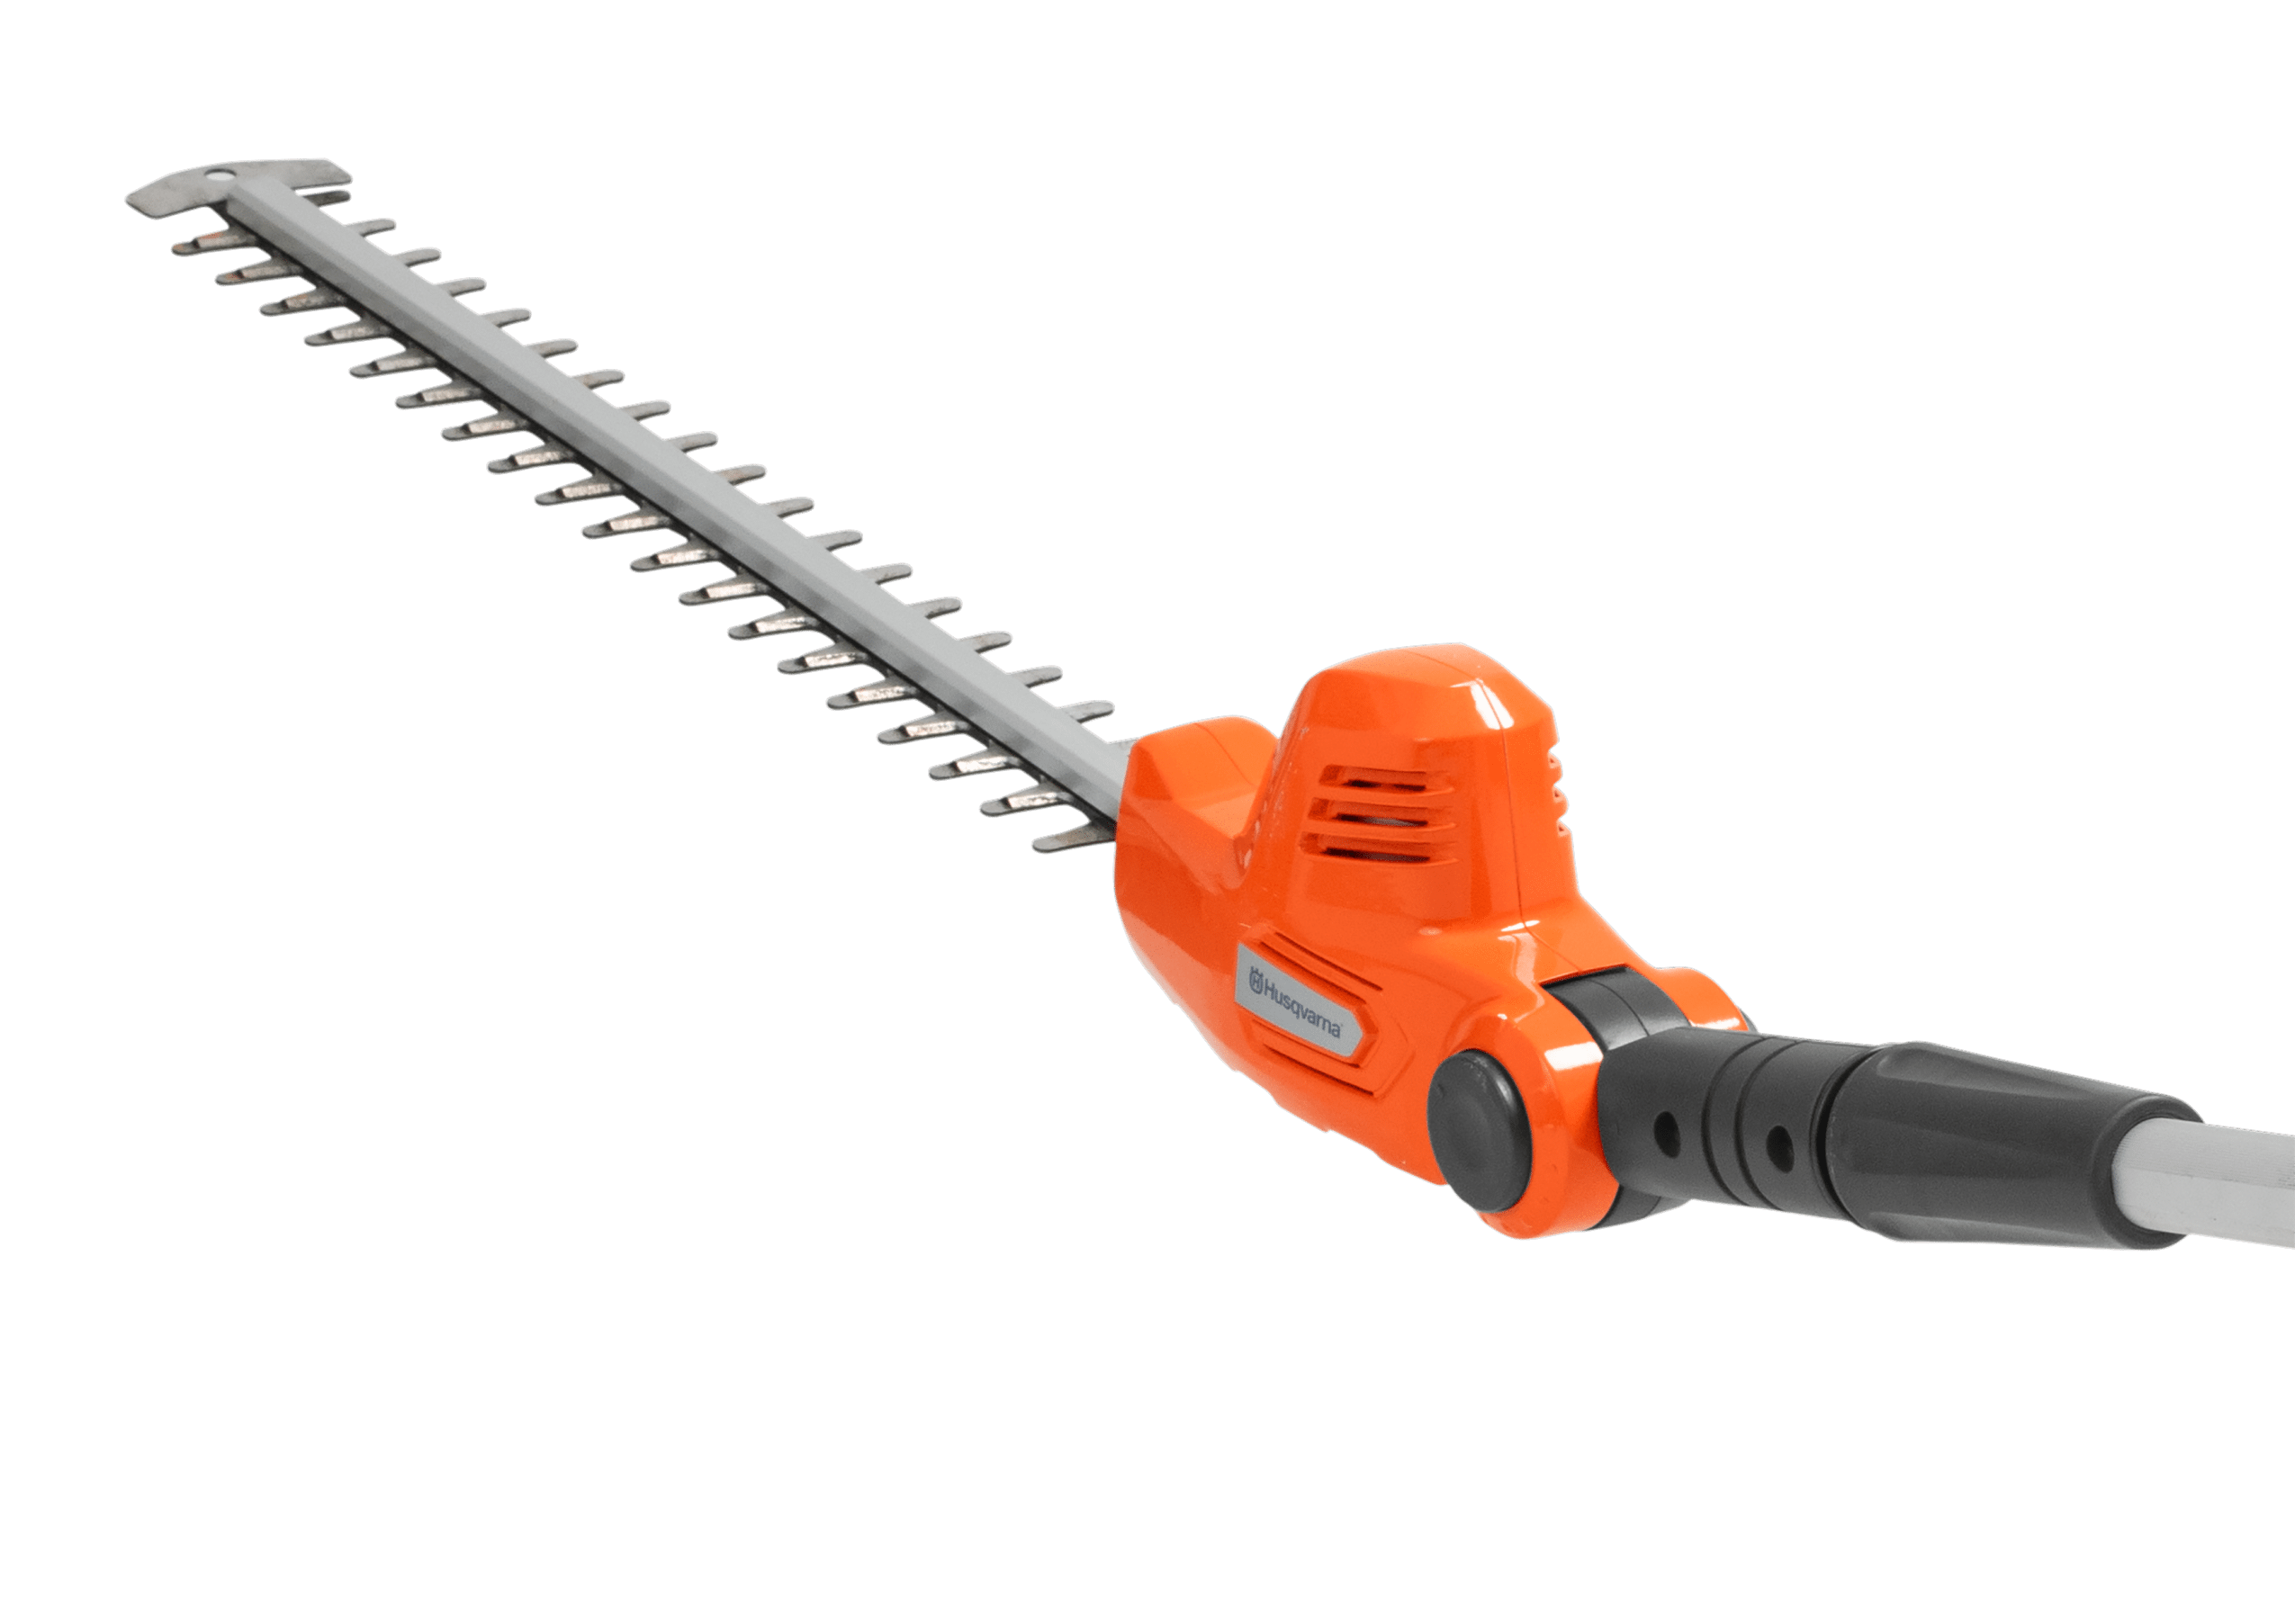 Hedge trimmer attachment - Battery Series HK4